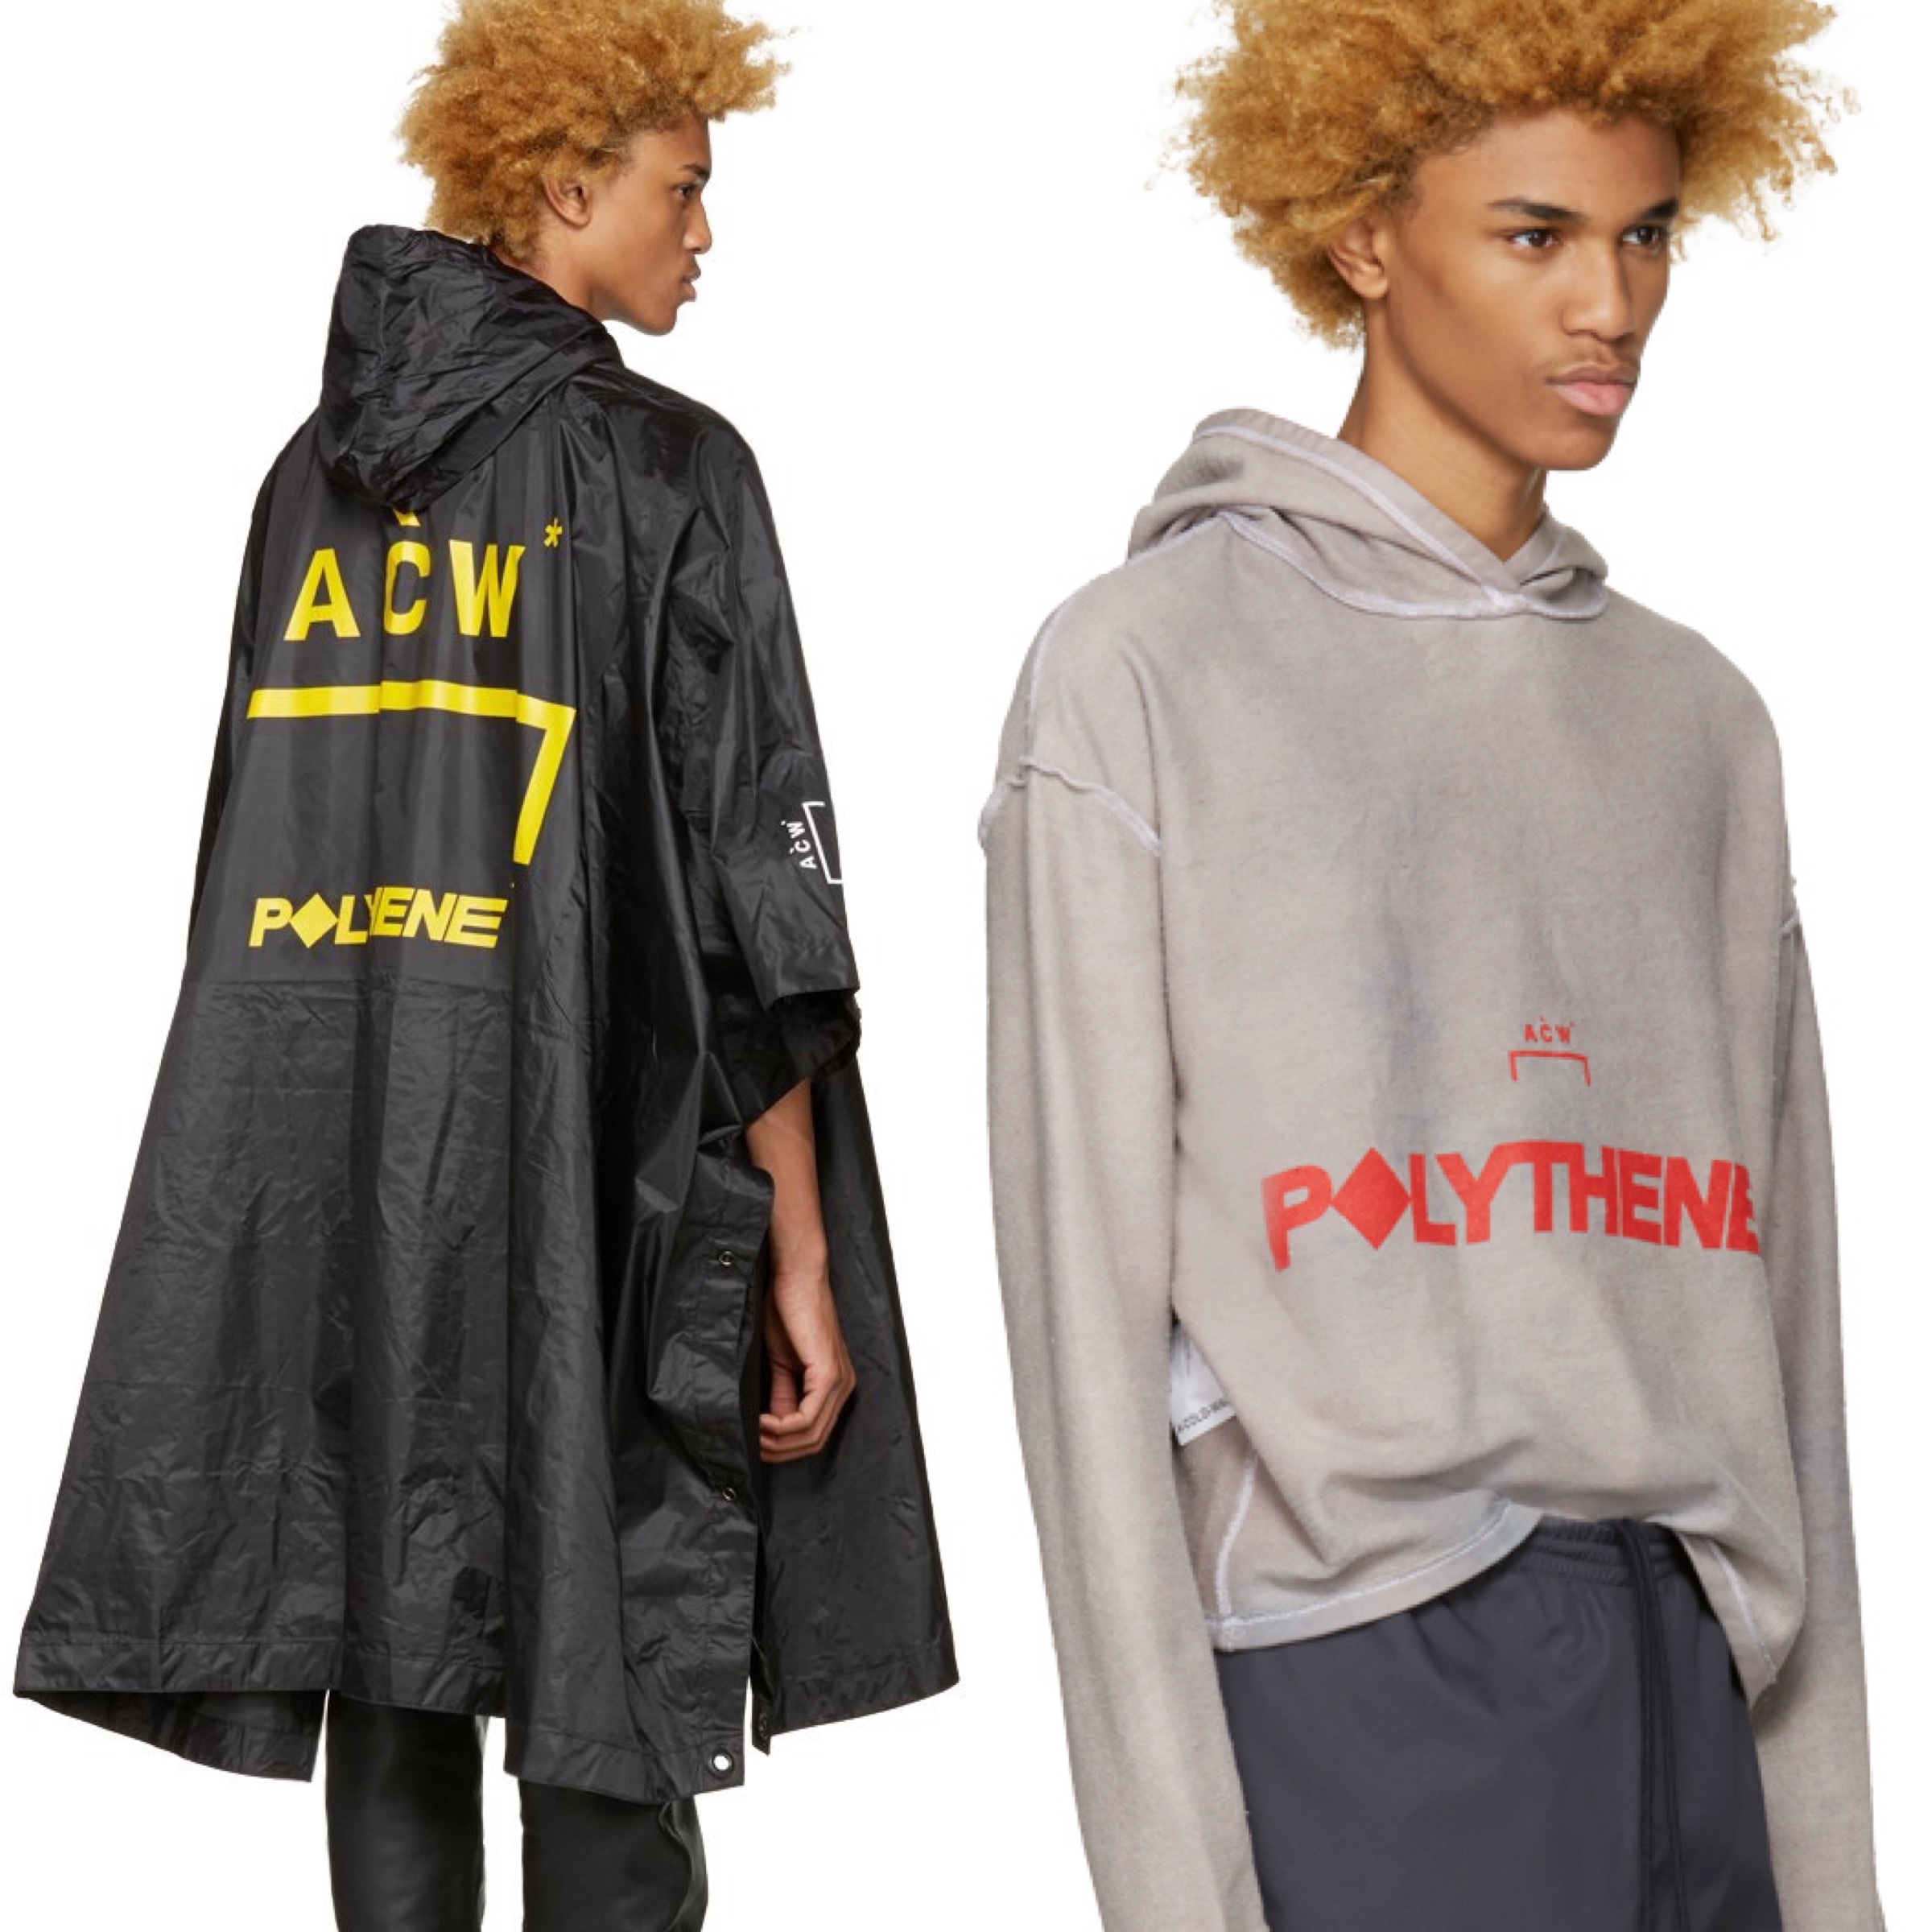 SSENSE Releases A-Cold-Wall* Fall/Winter 2016 Collection